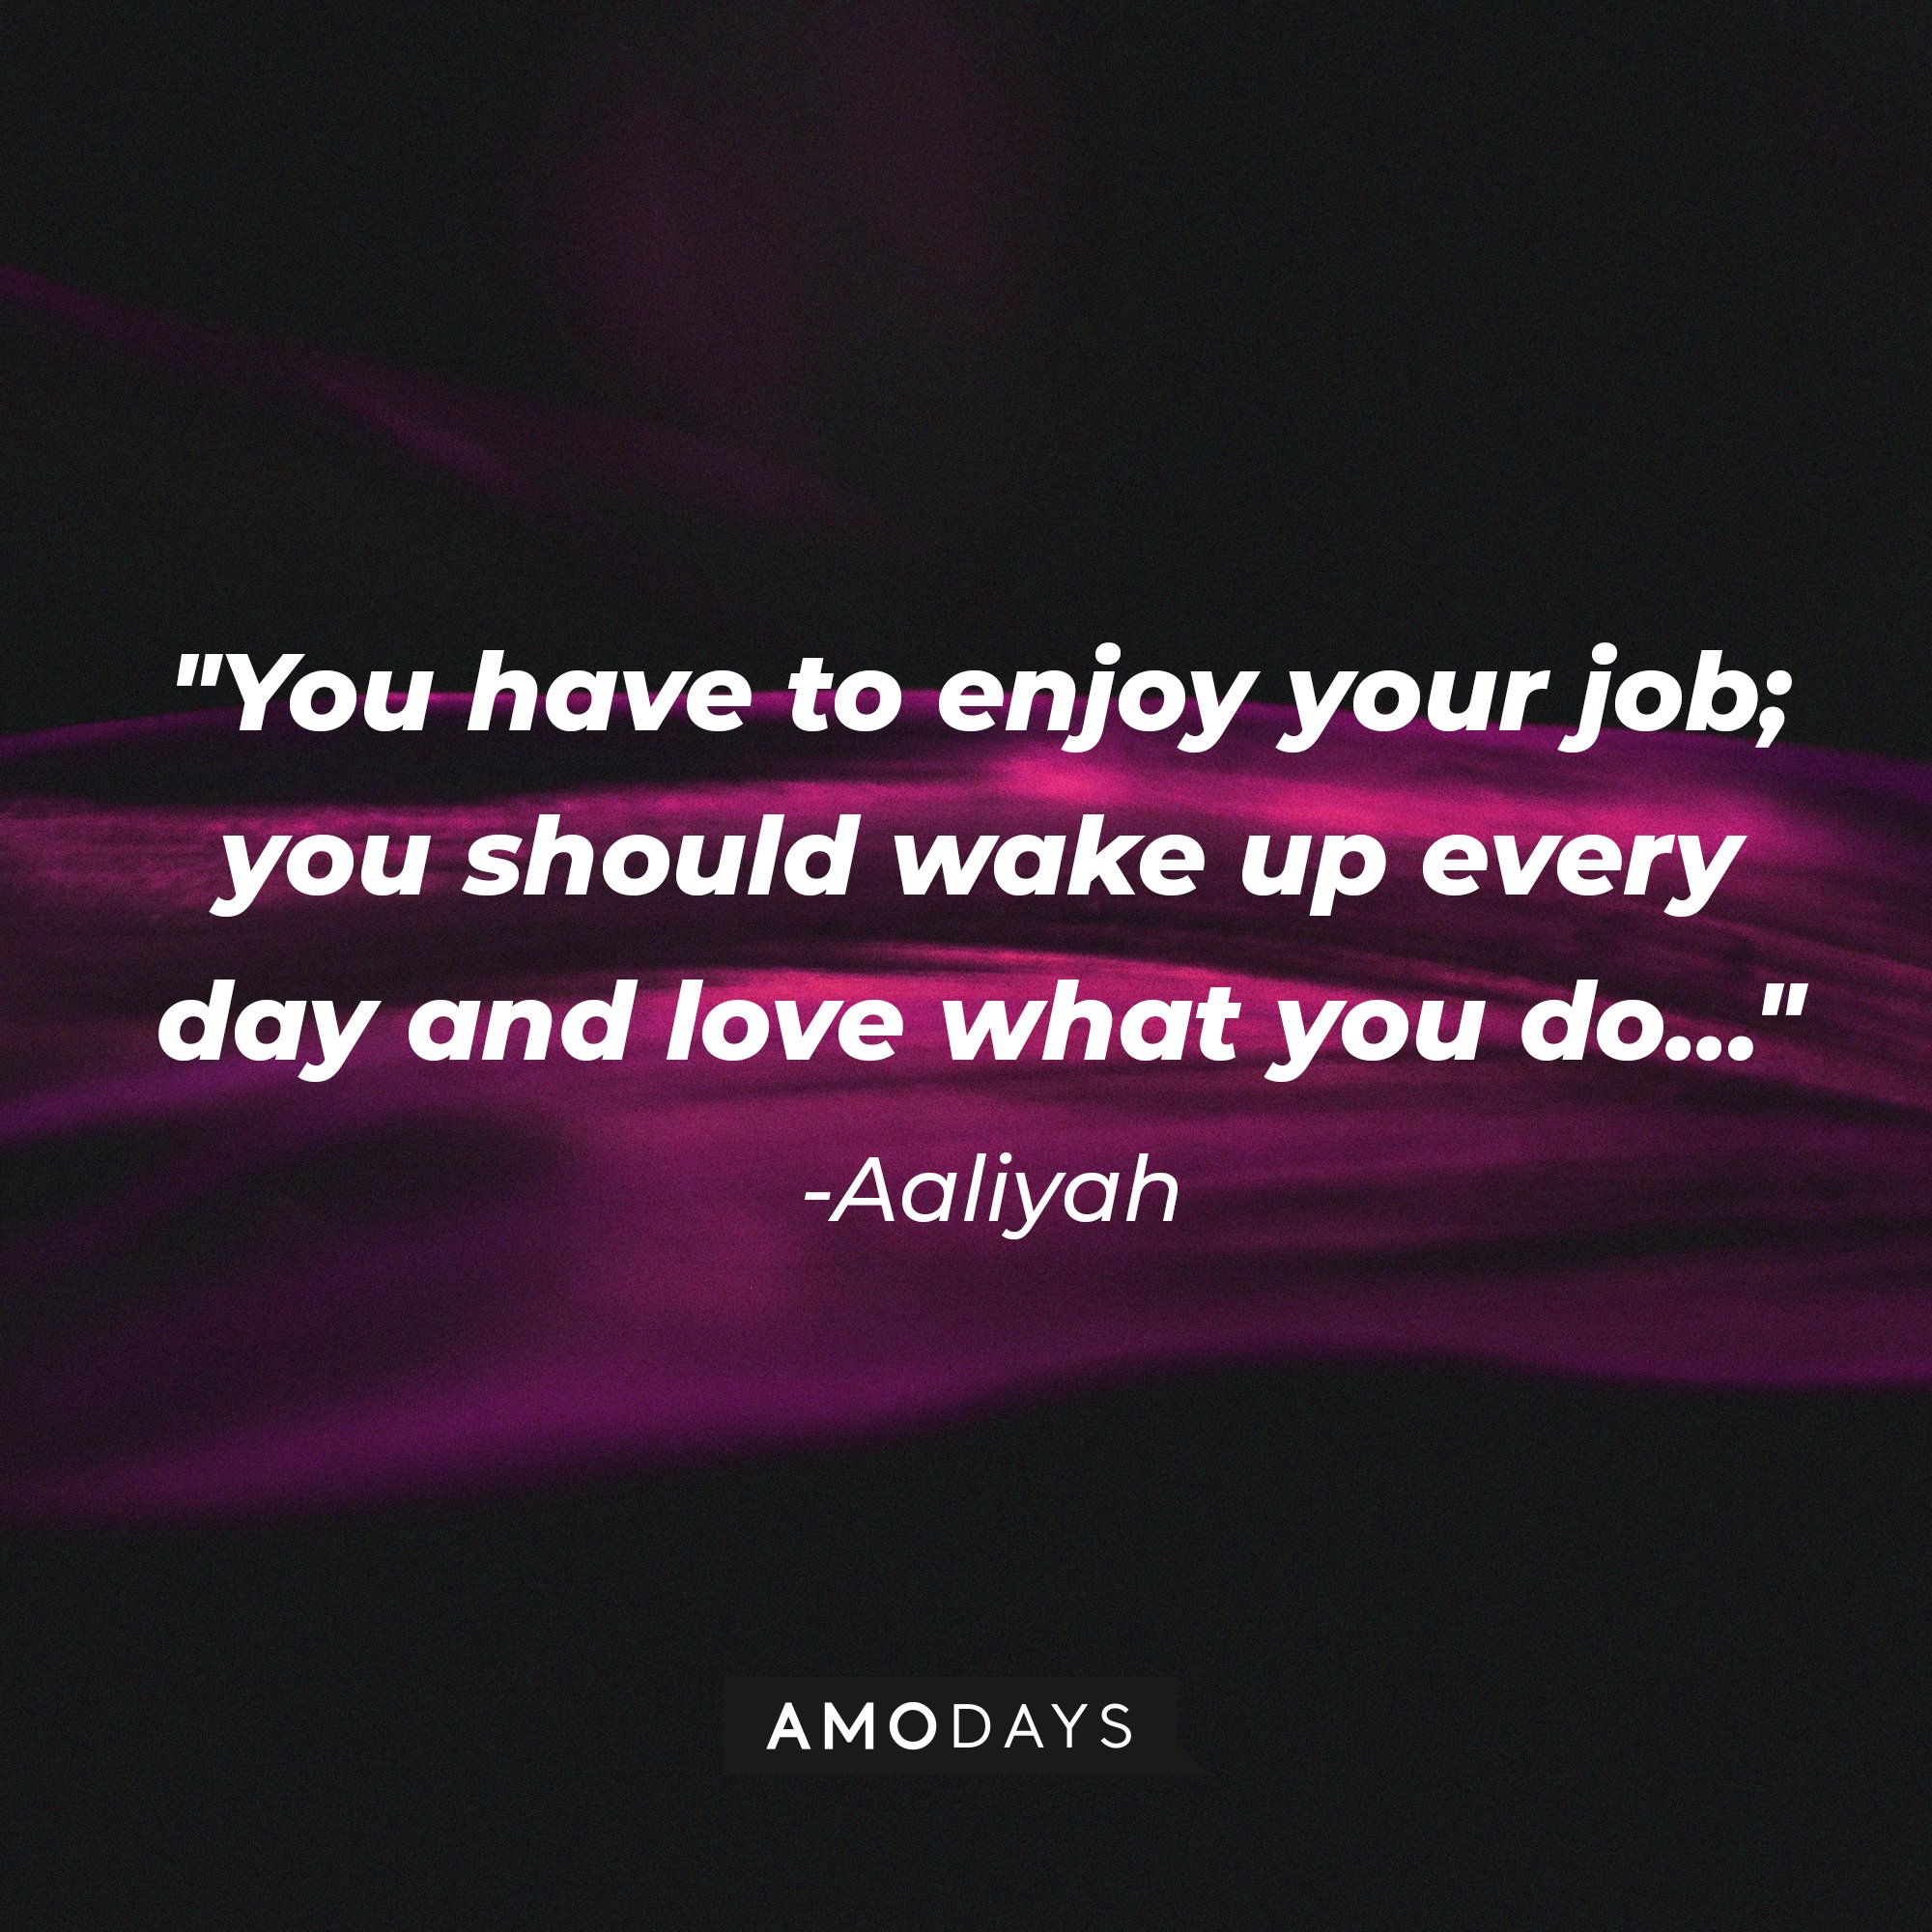 Aaliyah’s quote: "You have to enjoy your job; you should wake up every day and love what you do…" | Image: AmoDays